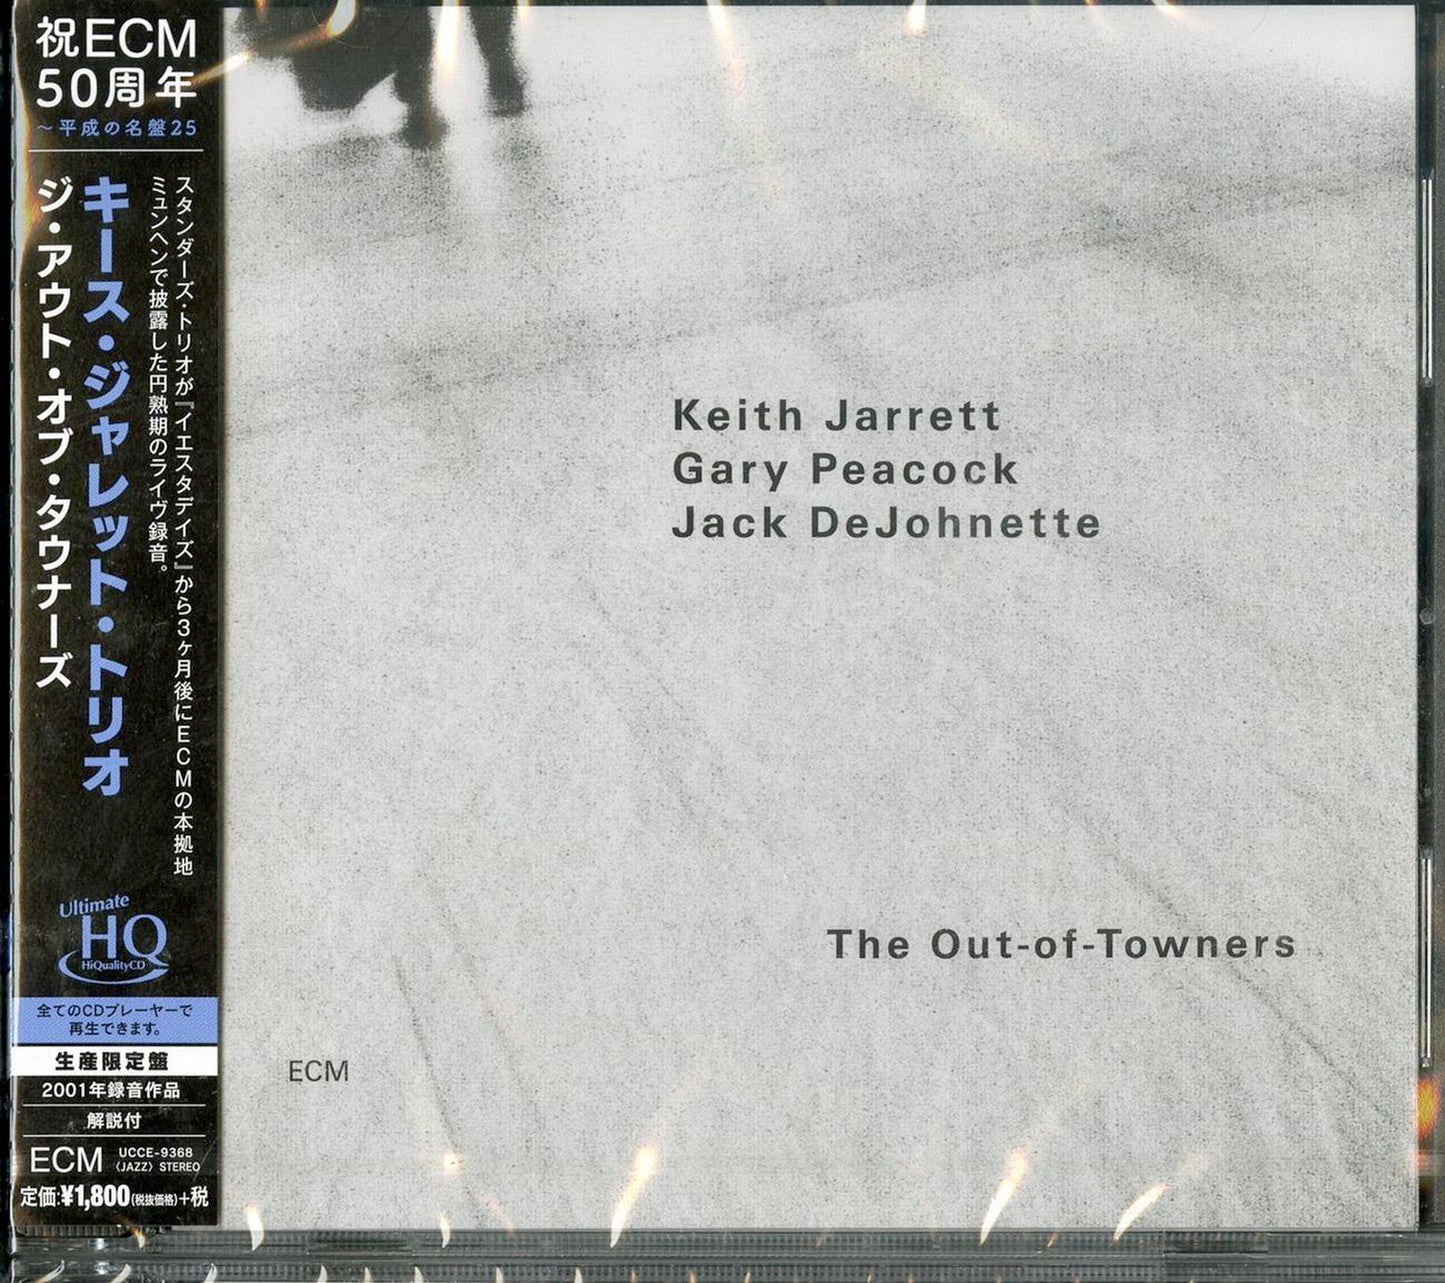 Keith Jarrett Trio - The Out-Of-Towners - UHQCD Limited Edition